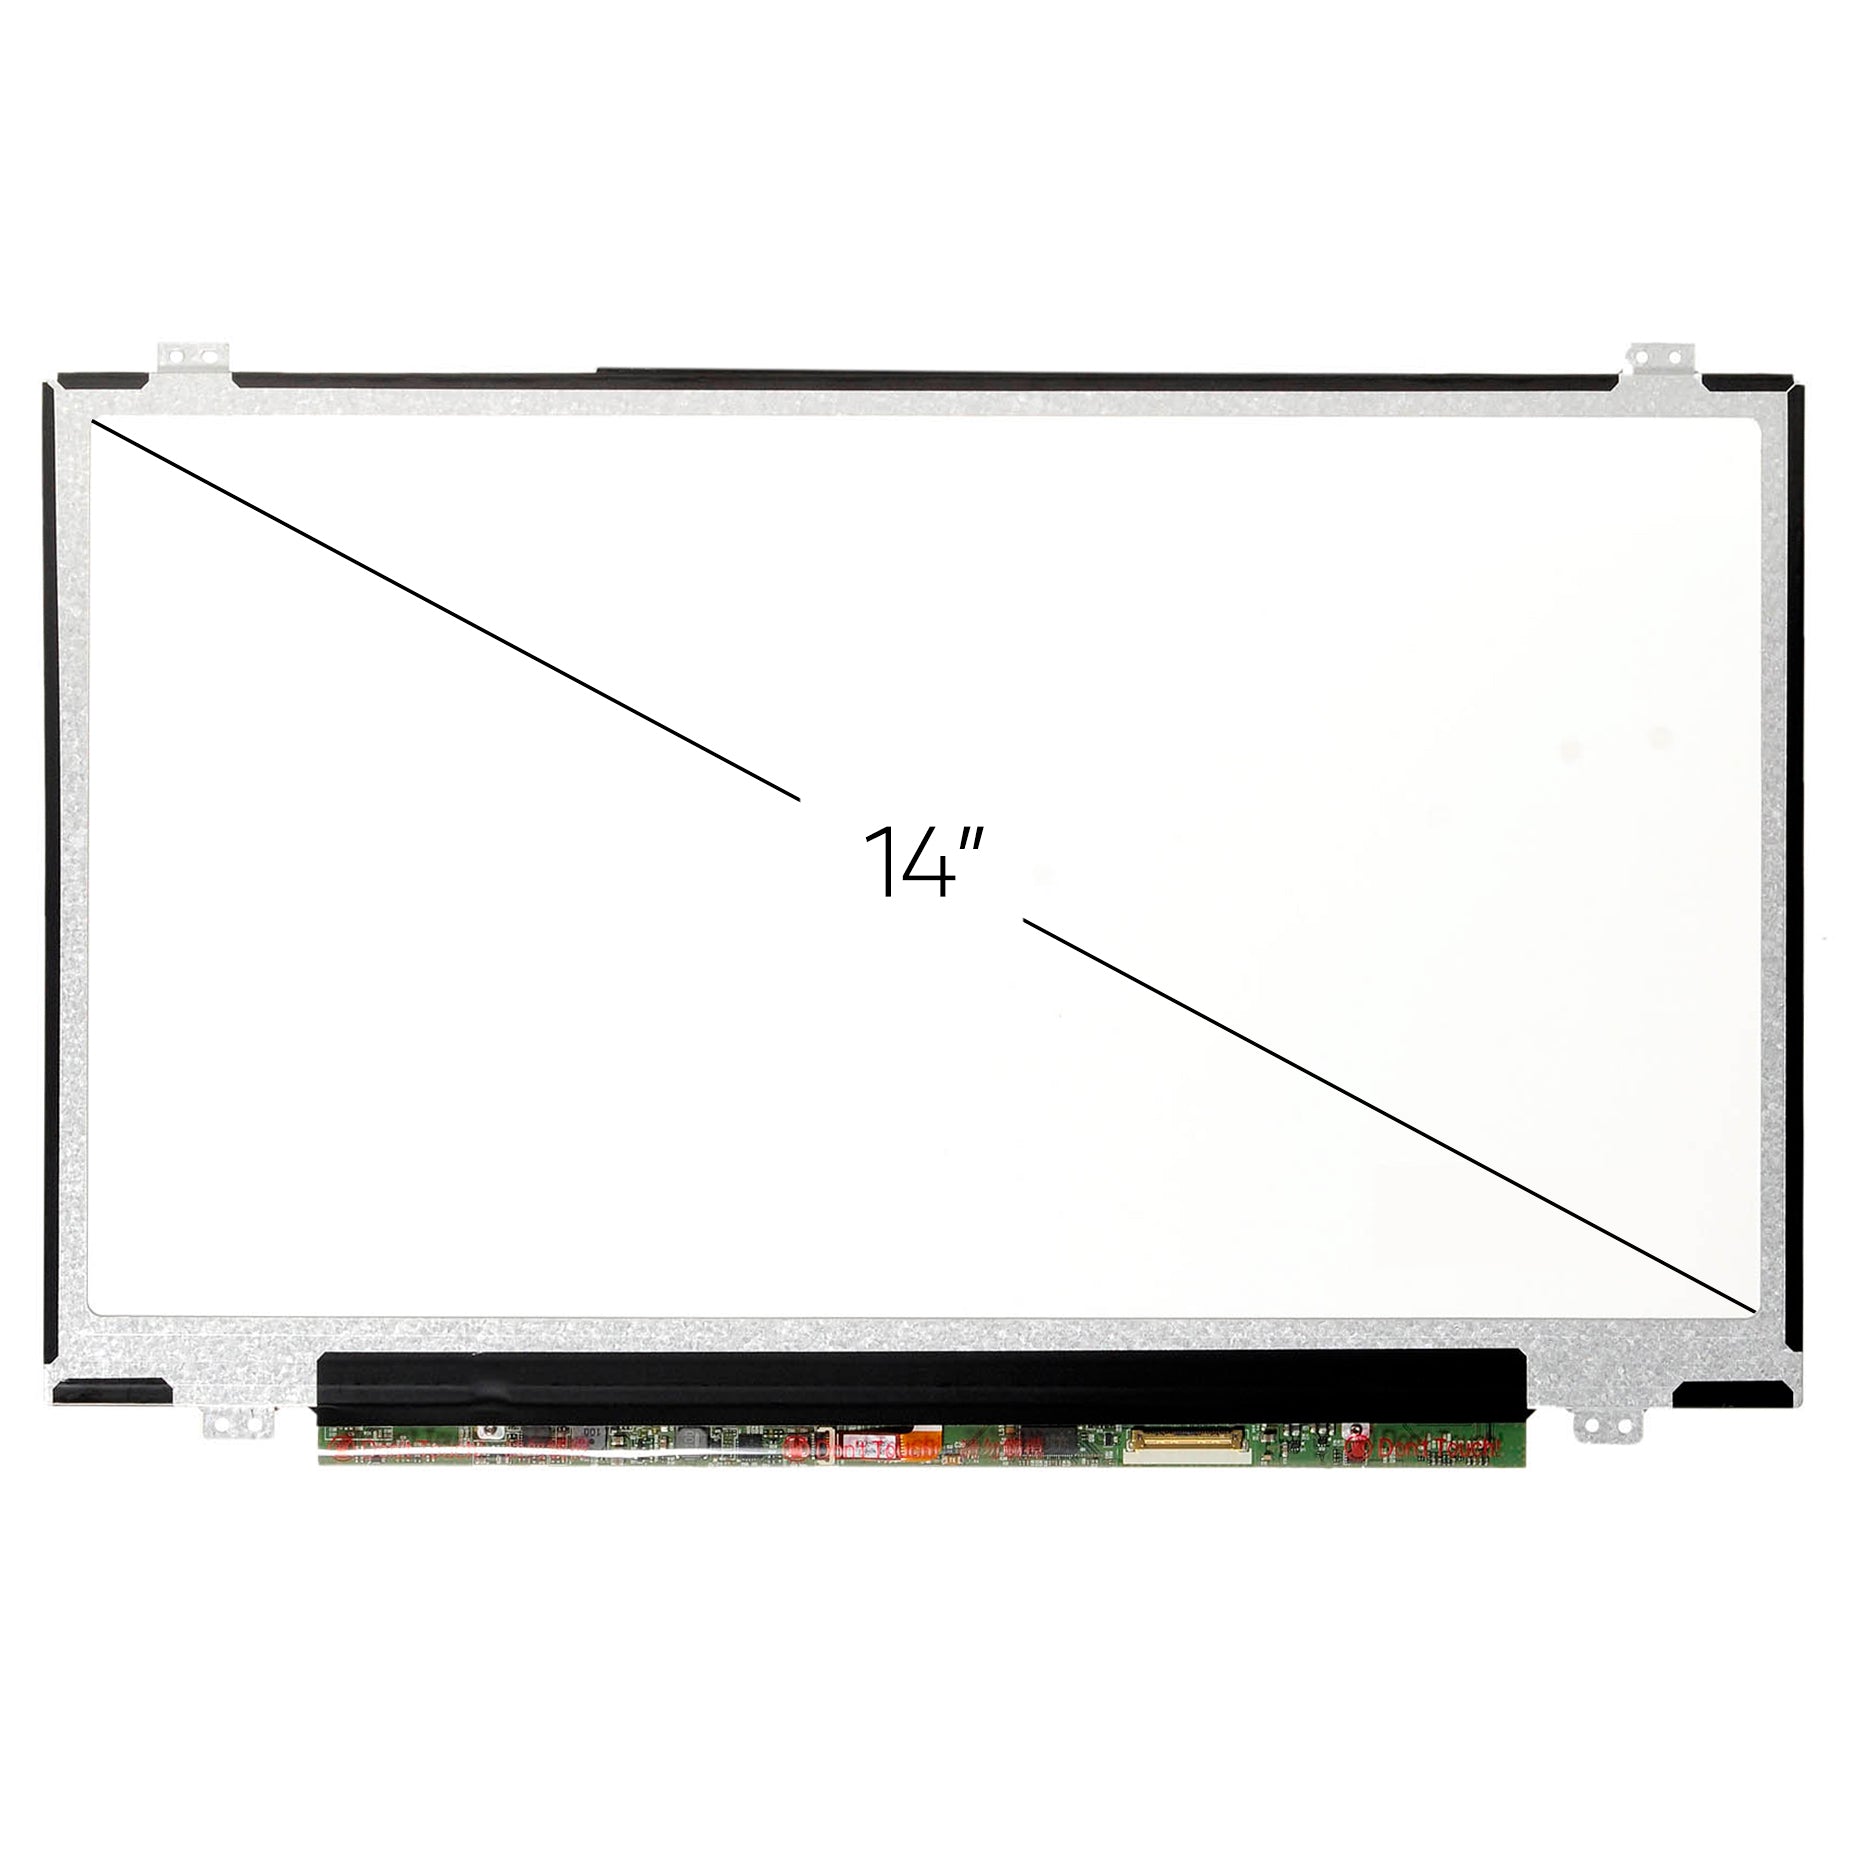 Screen Replacement for HP Probook 640 G1 FHD 1920x1080 IPS Matte LCD LED Display